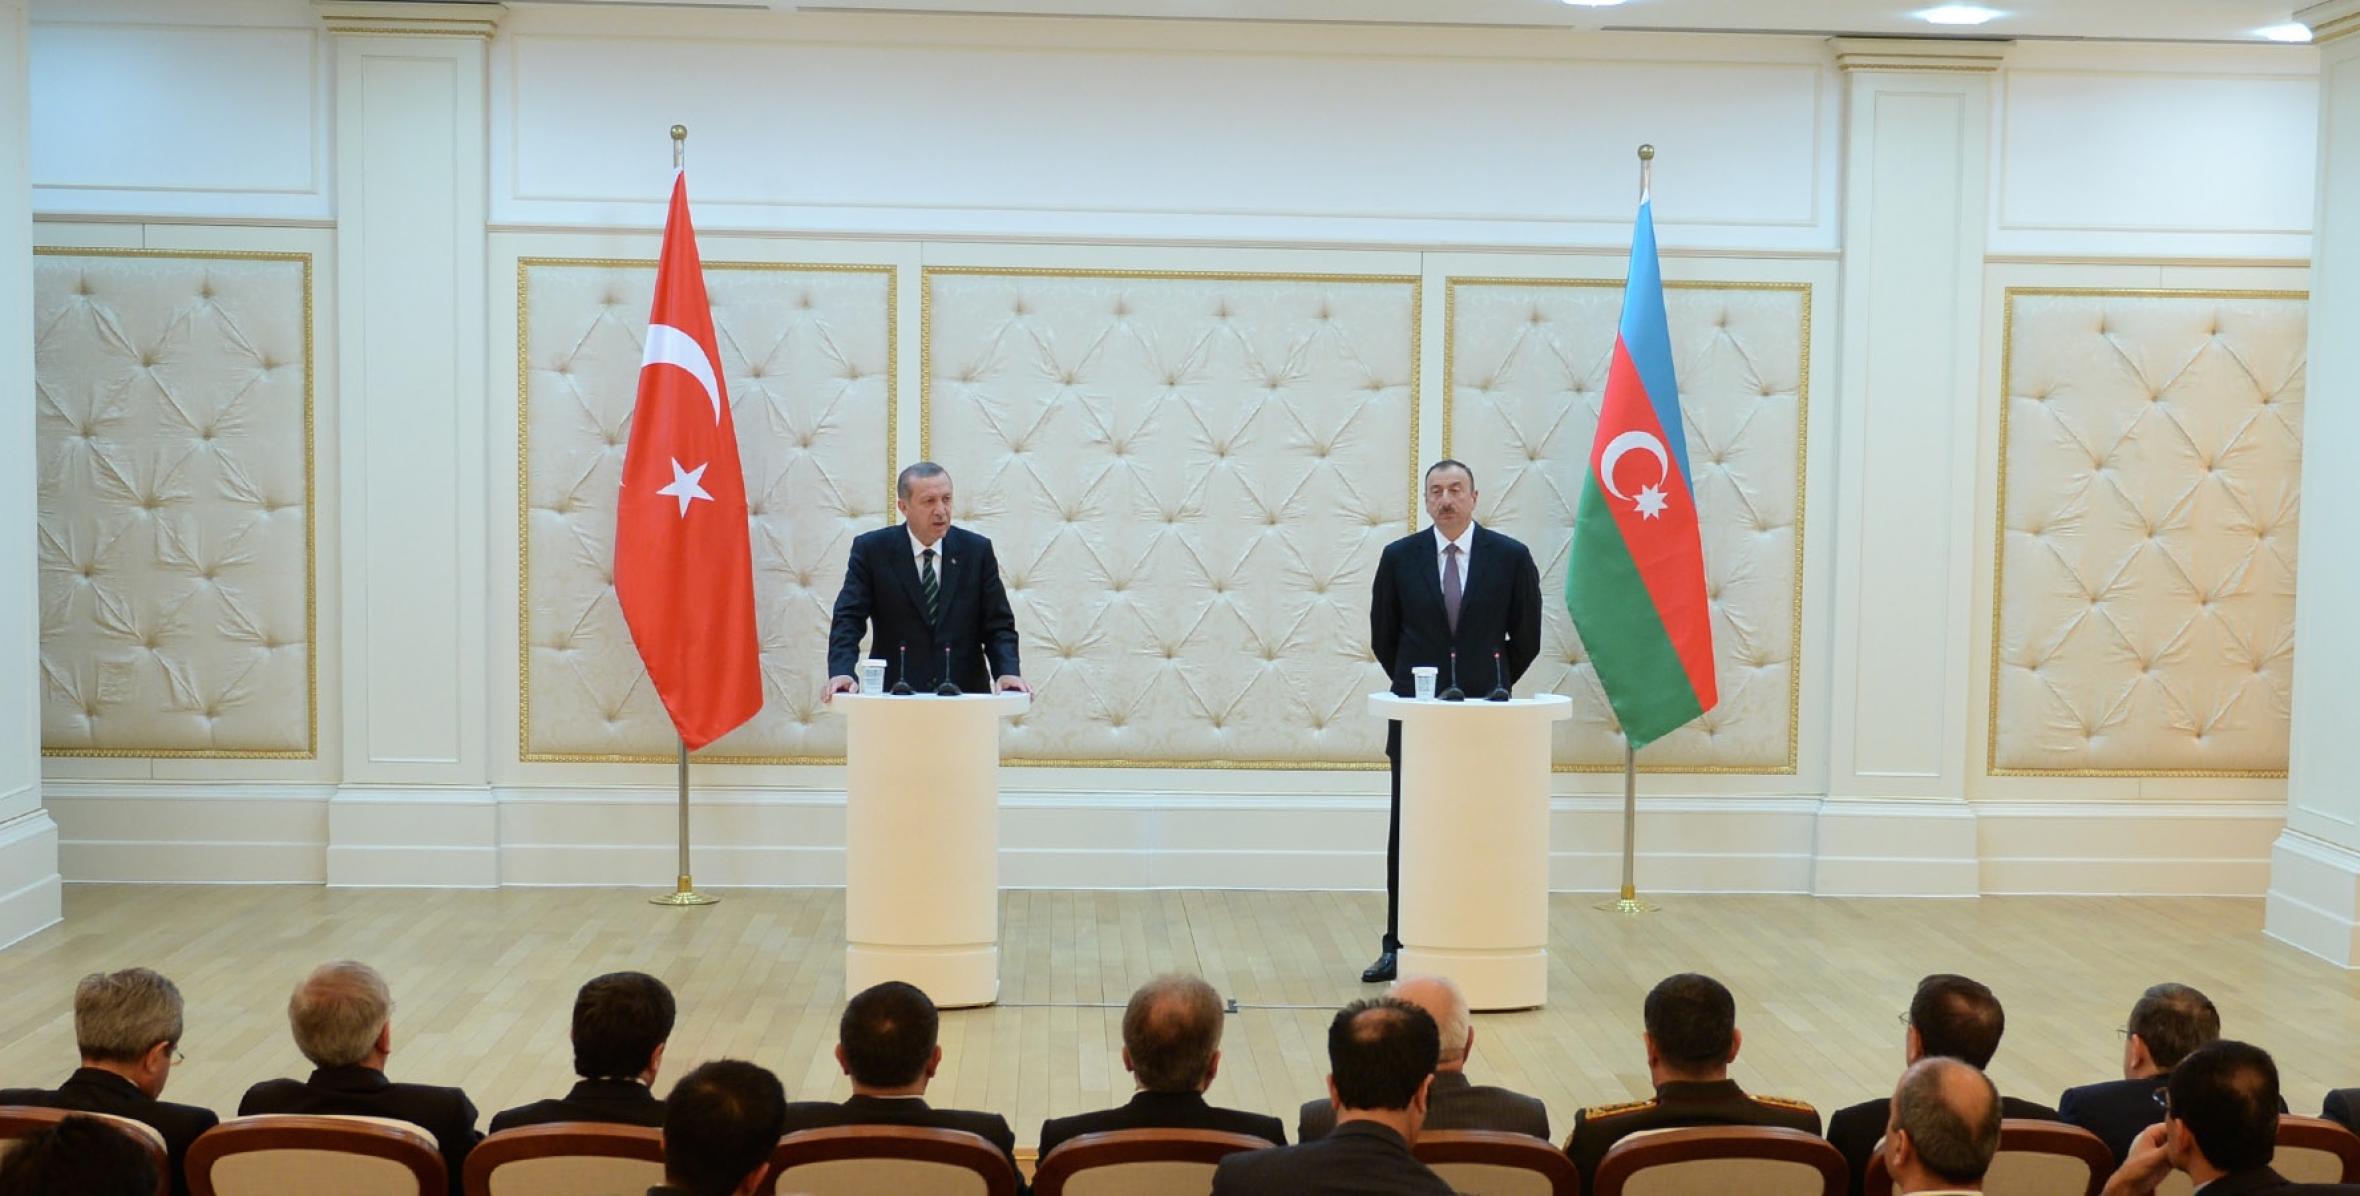 Ilham Aliyev and Prime Minister Recep Tayyip Erdogan held a joint press conference